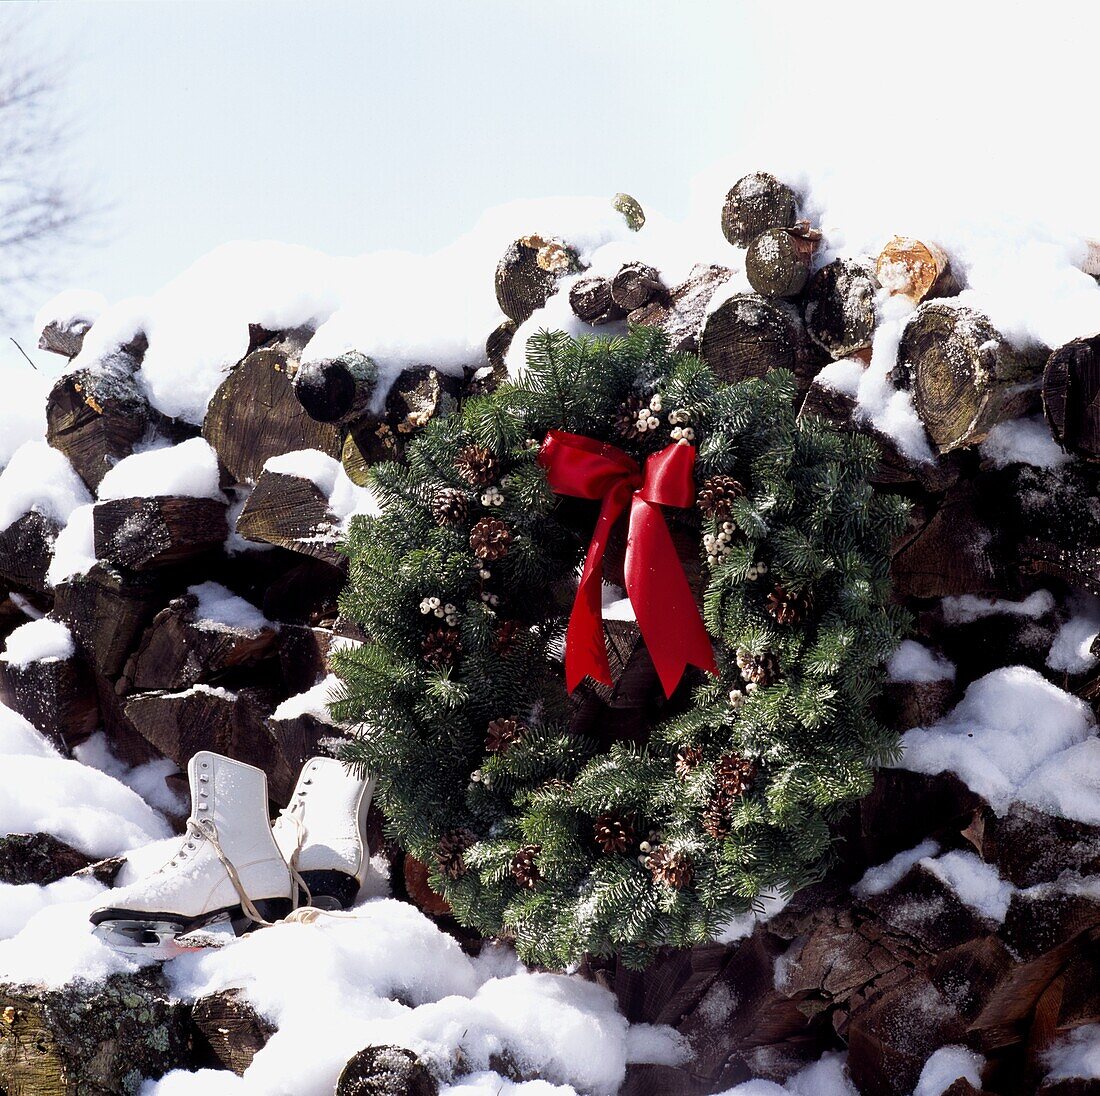 Log pile with Festive Evergreen wreath in snow